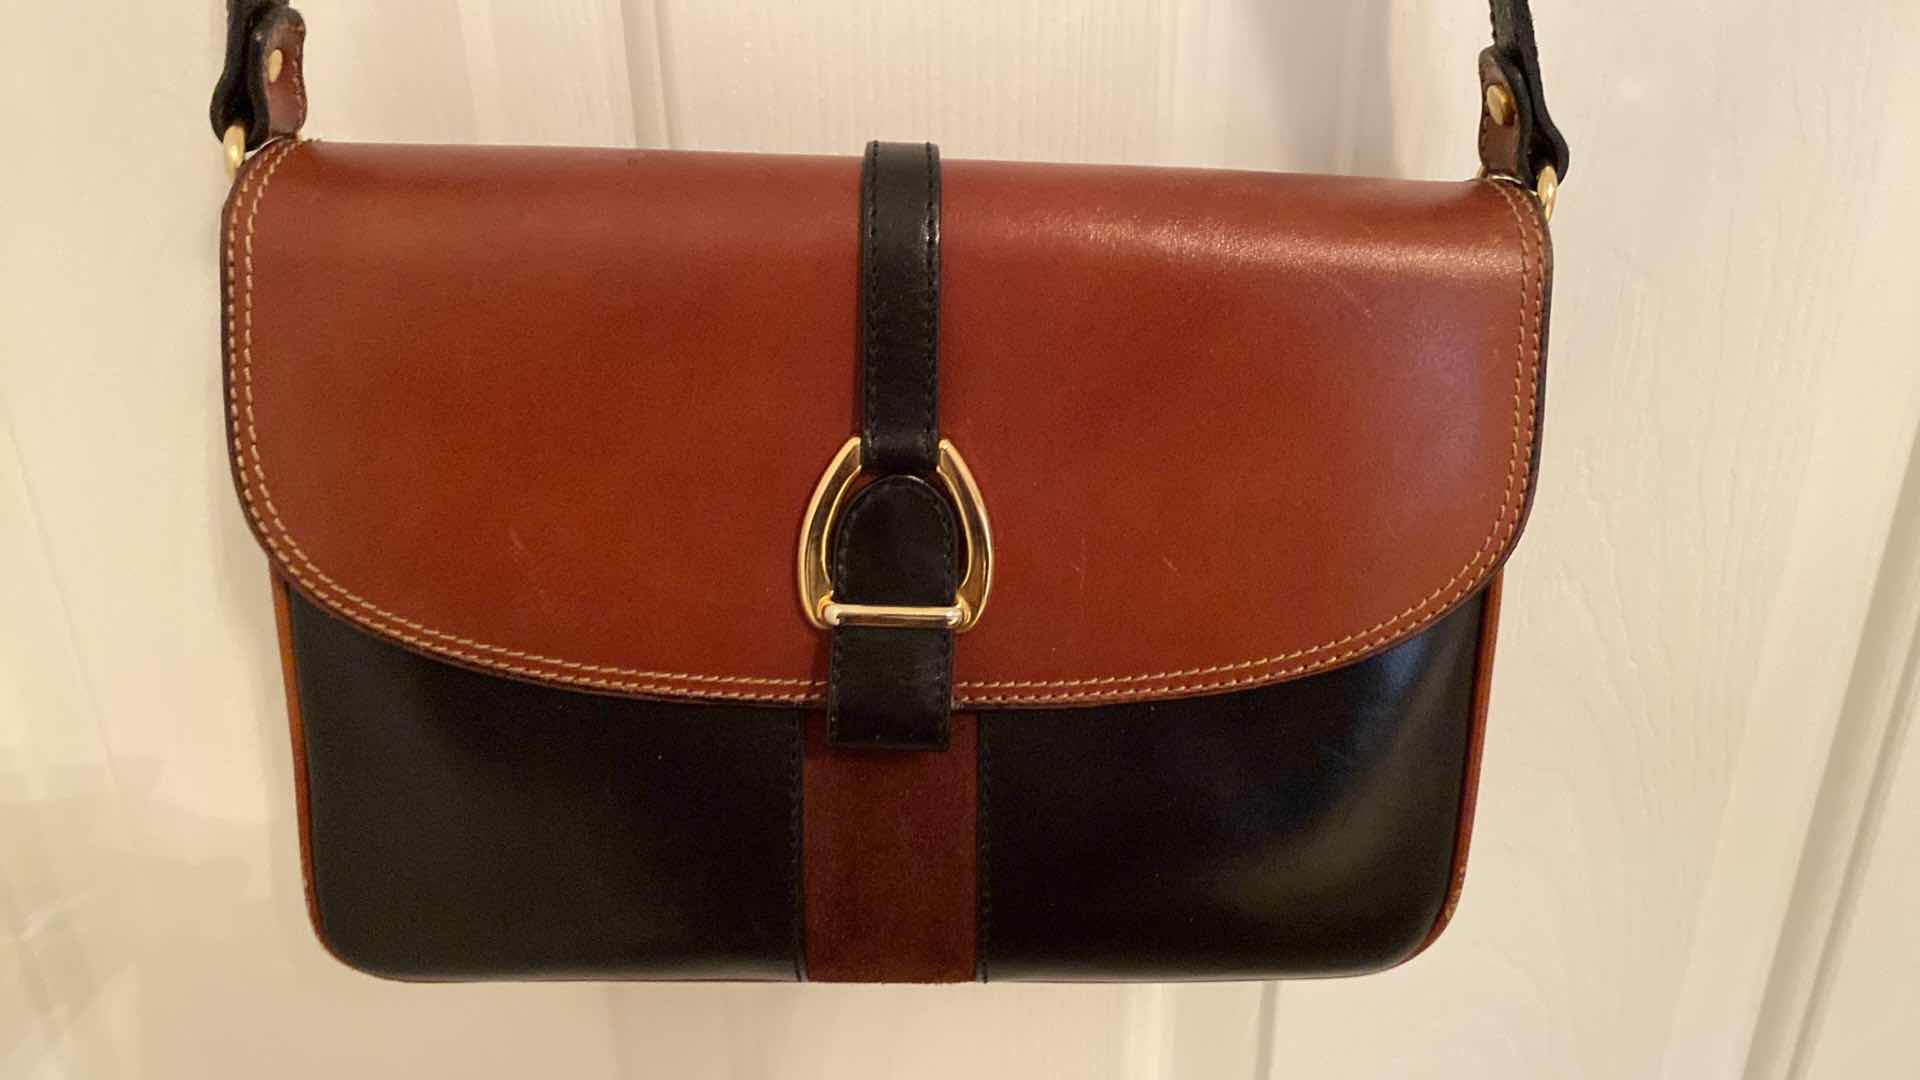 Photo 2 of WOMENS GERONICO LEATHER WITH SUEDE INSET IN FRONT SHOULDER BAG FROM FLORENCE, ITALY 10 1/2” X 7 3/4”